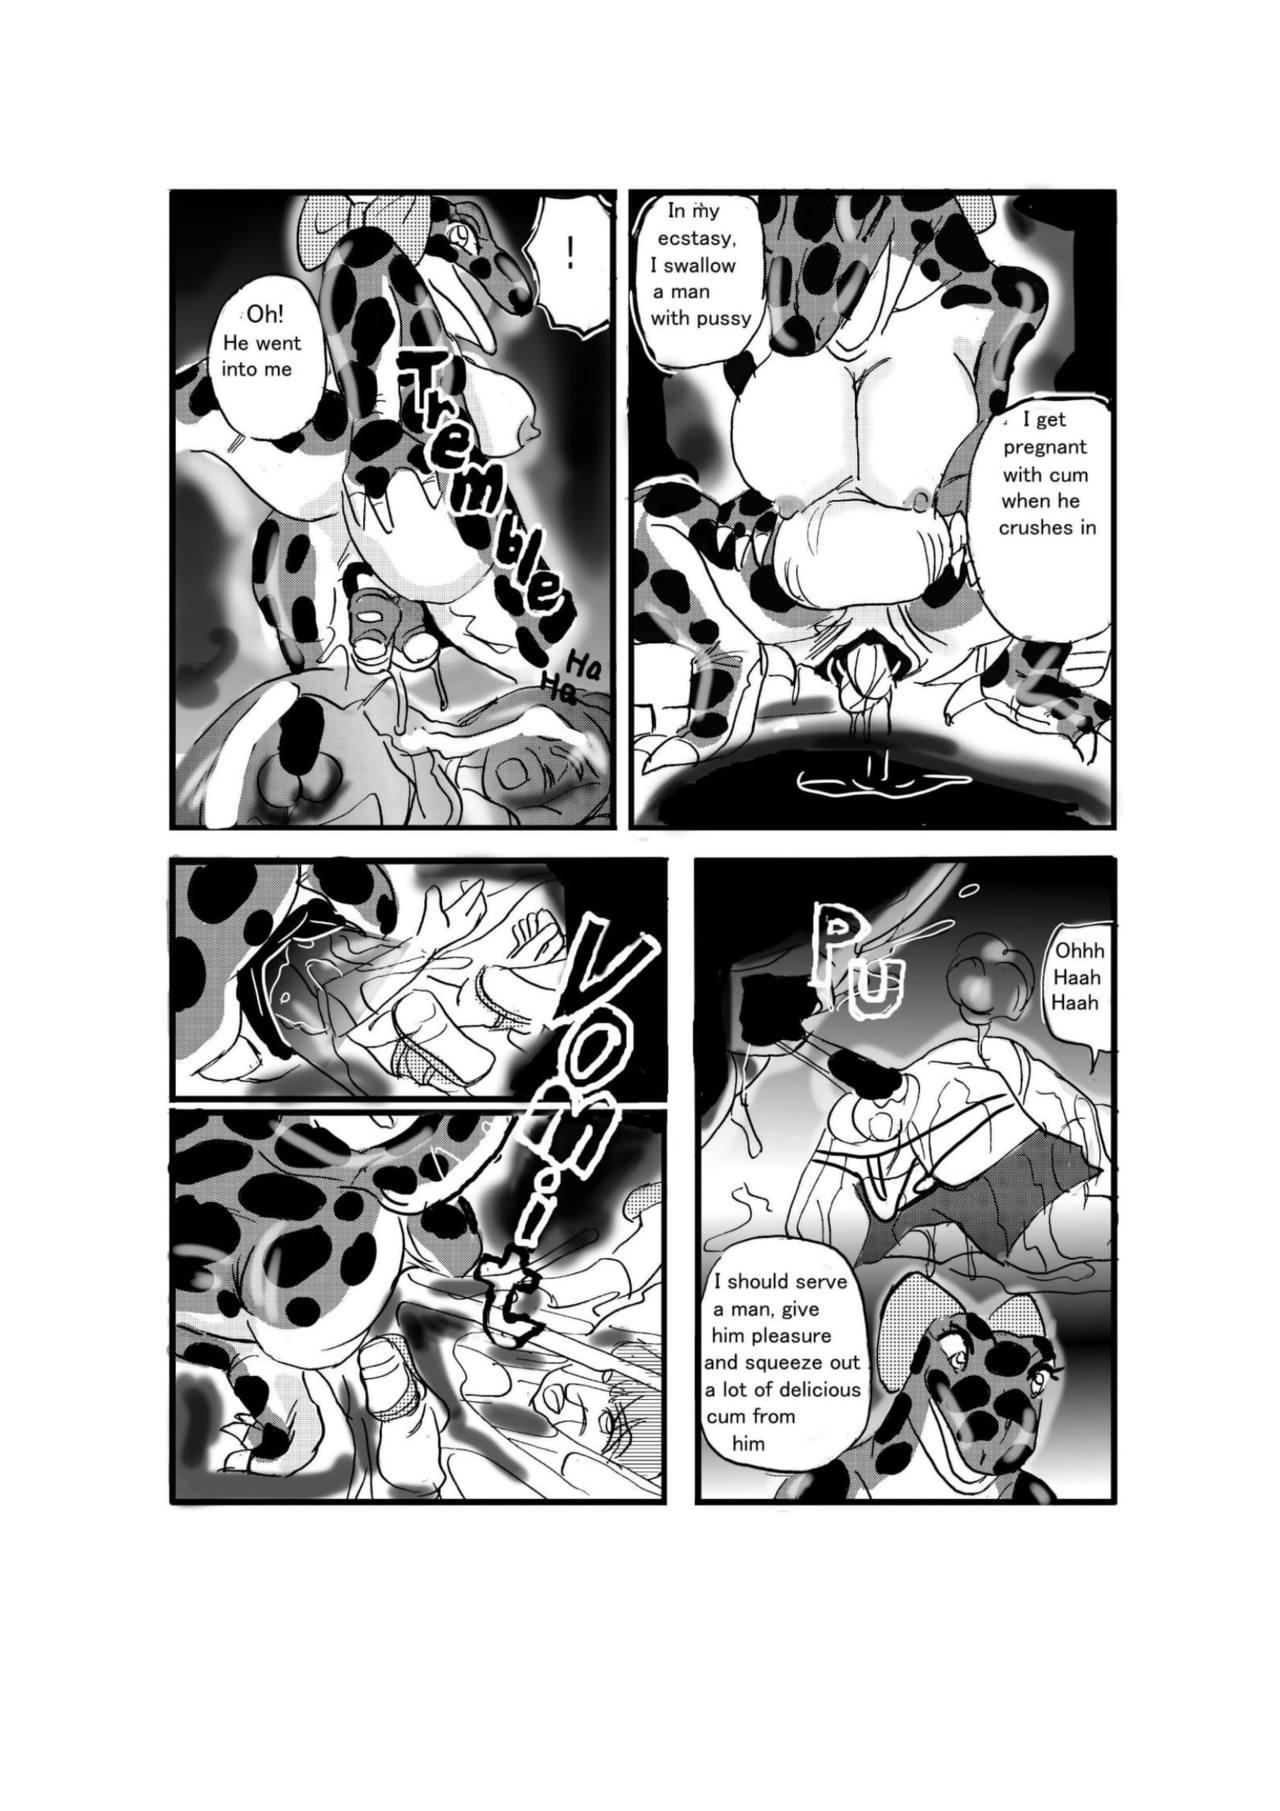 Sucks Swallowed Whole vol.2 Waniko + What's Digestion? - Original Point Of View - Page 6